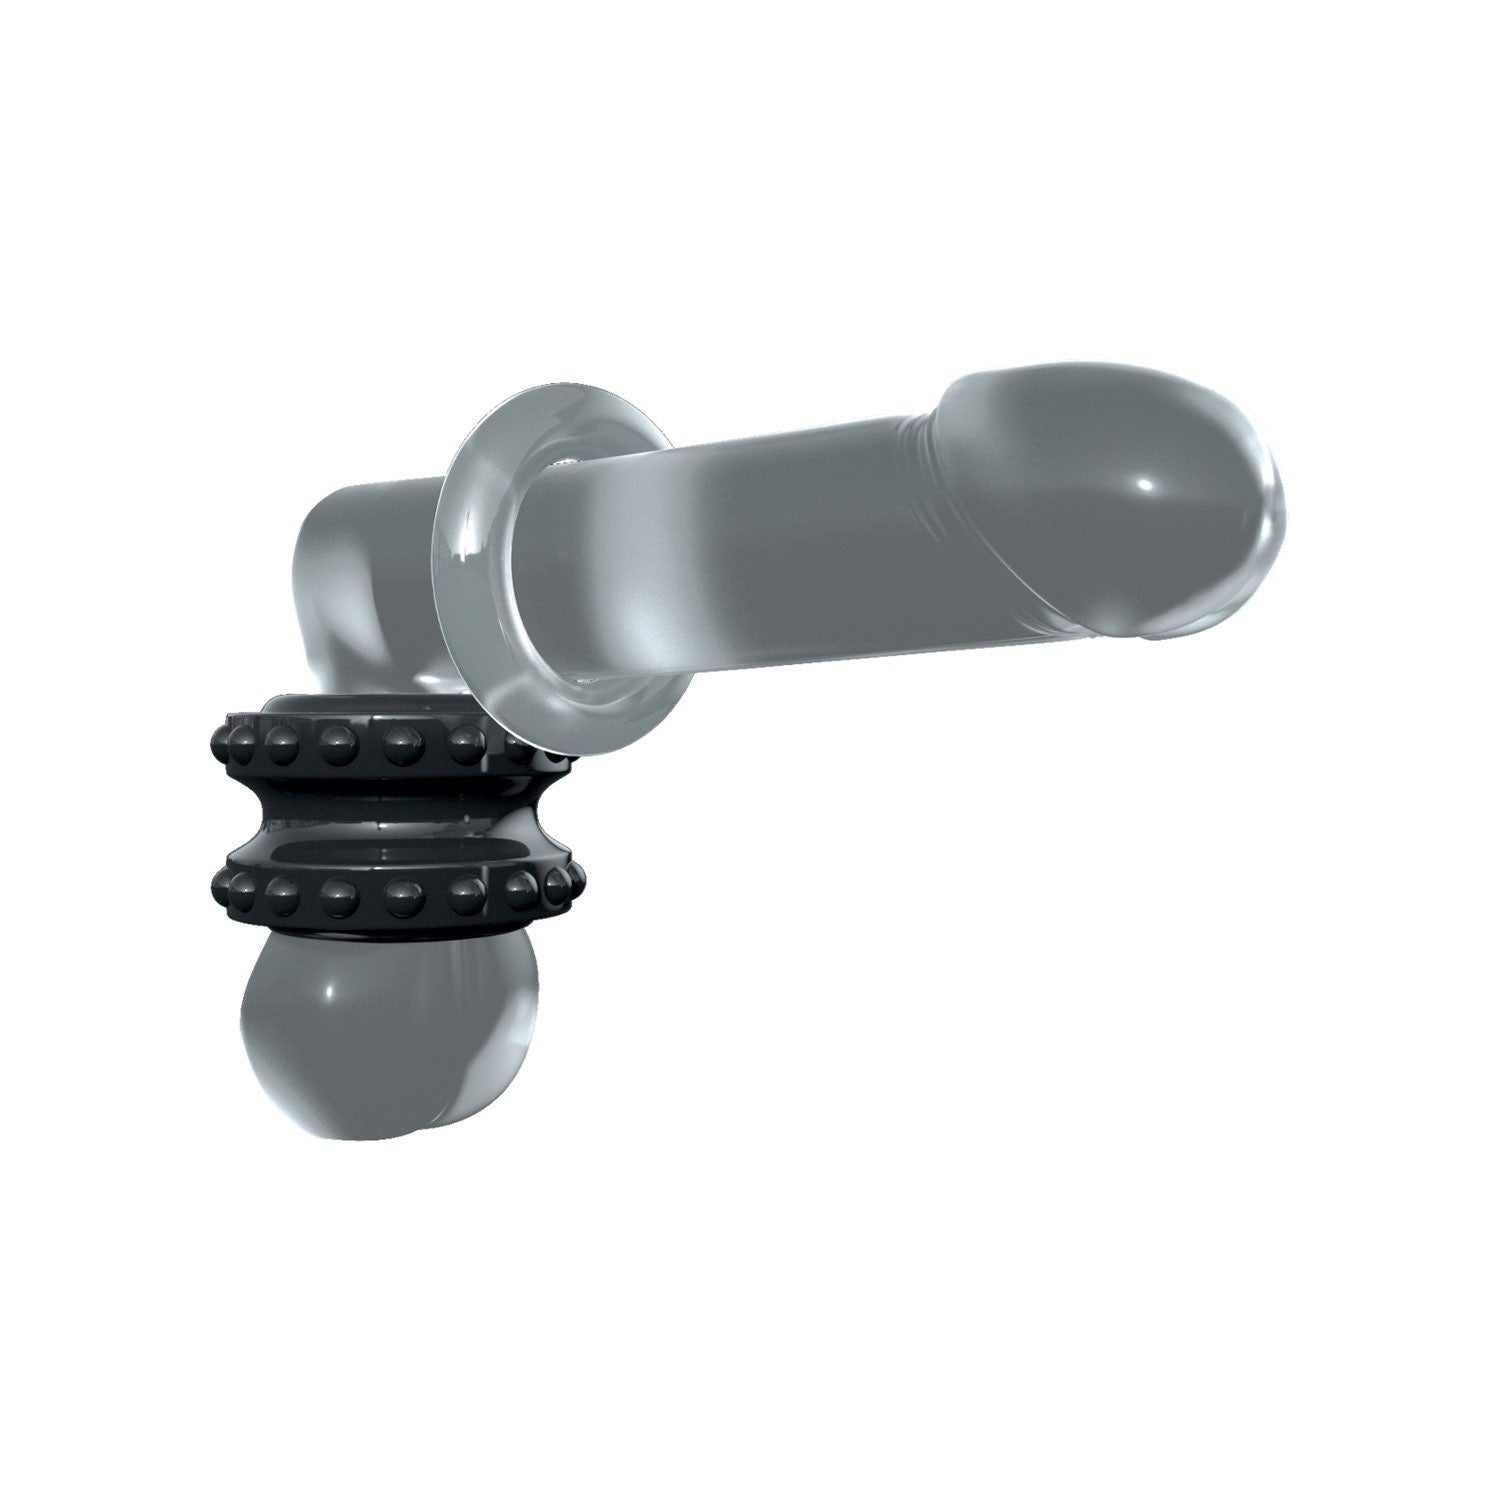 Sir Richards Pro Performance Advanced C-Ring - Black/Clear Cock Ring by Pipedream